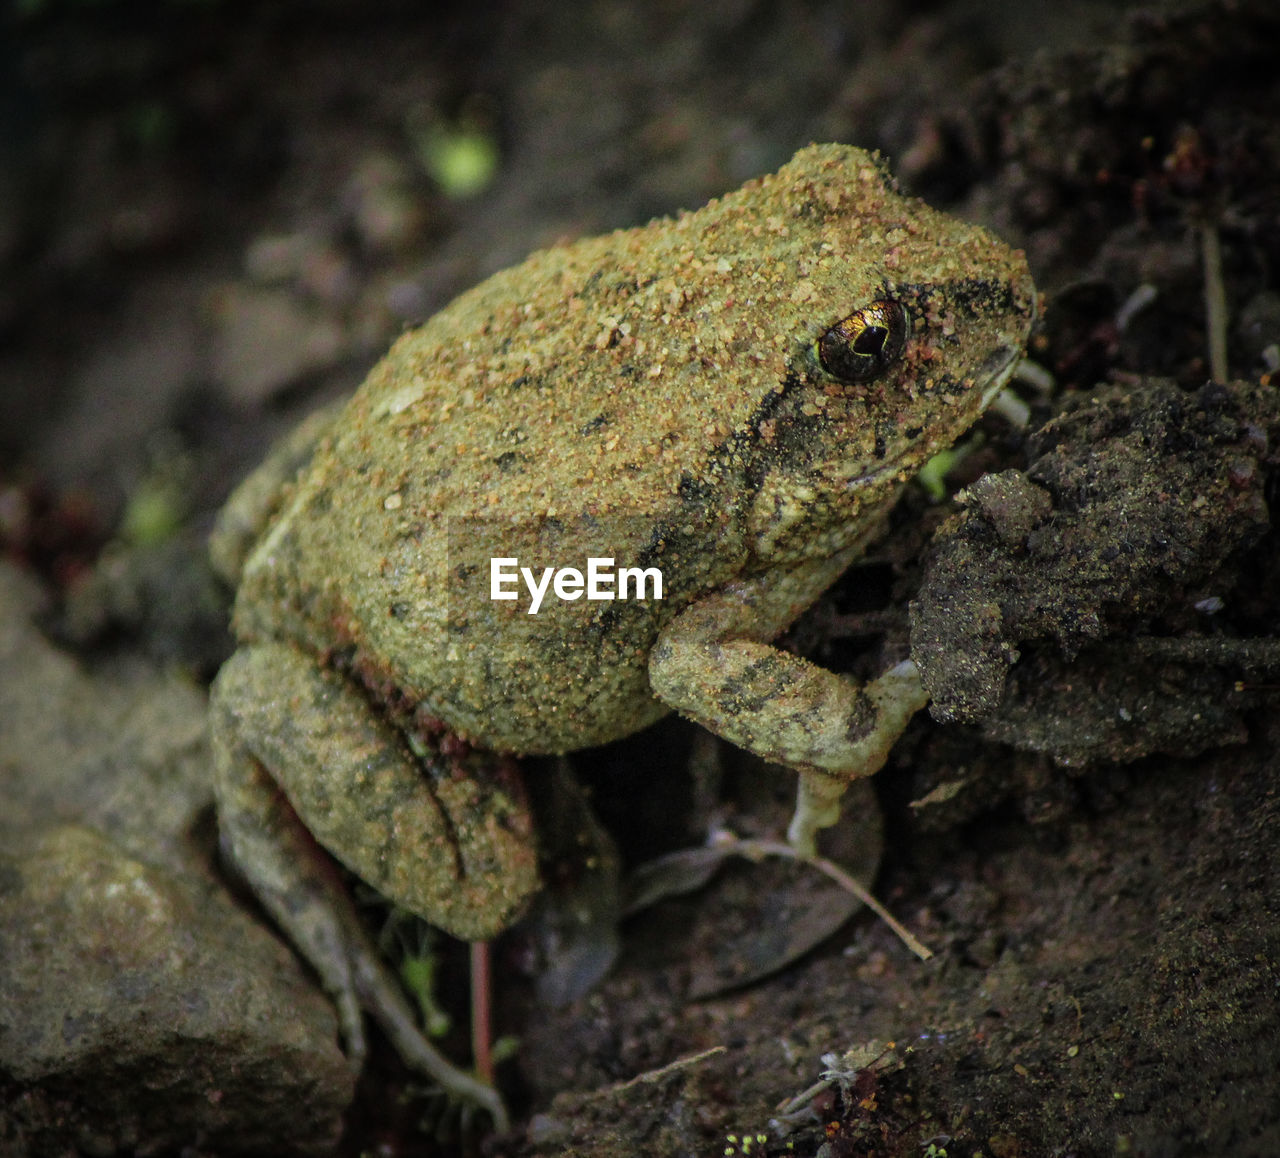 CLOSE-UP OF FROG